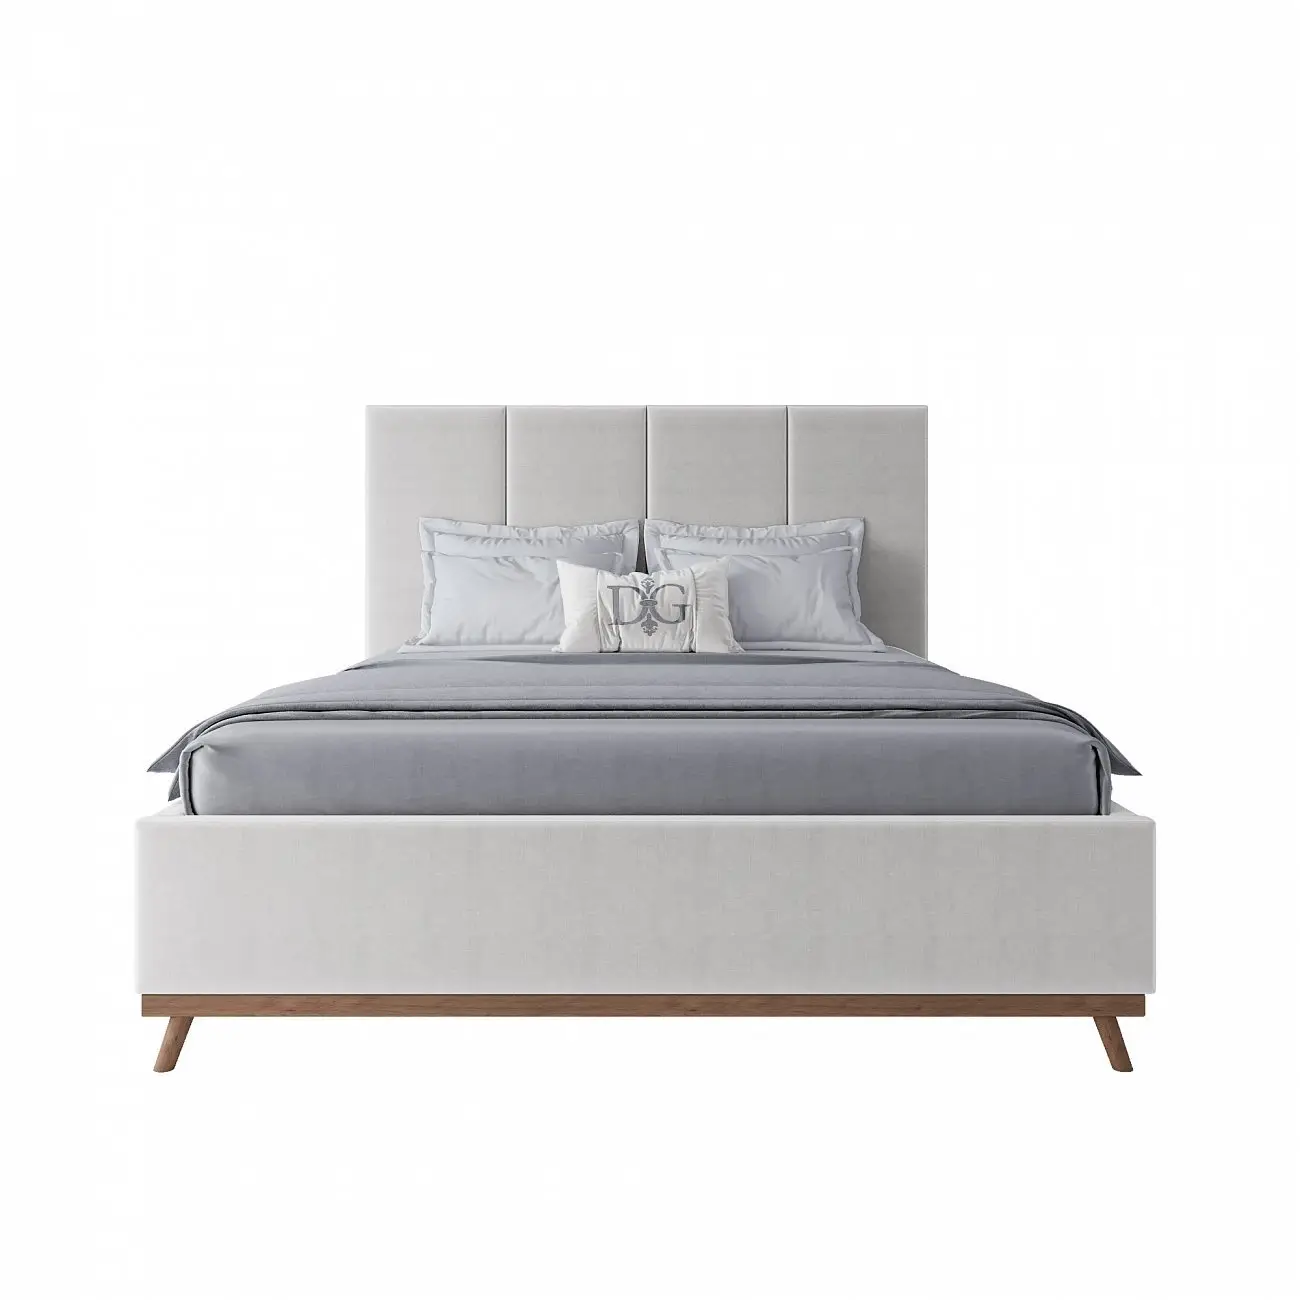 Double bed with upholstered headboard 160x200 cm white Carter Snowfall